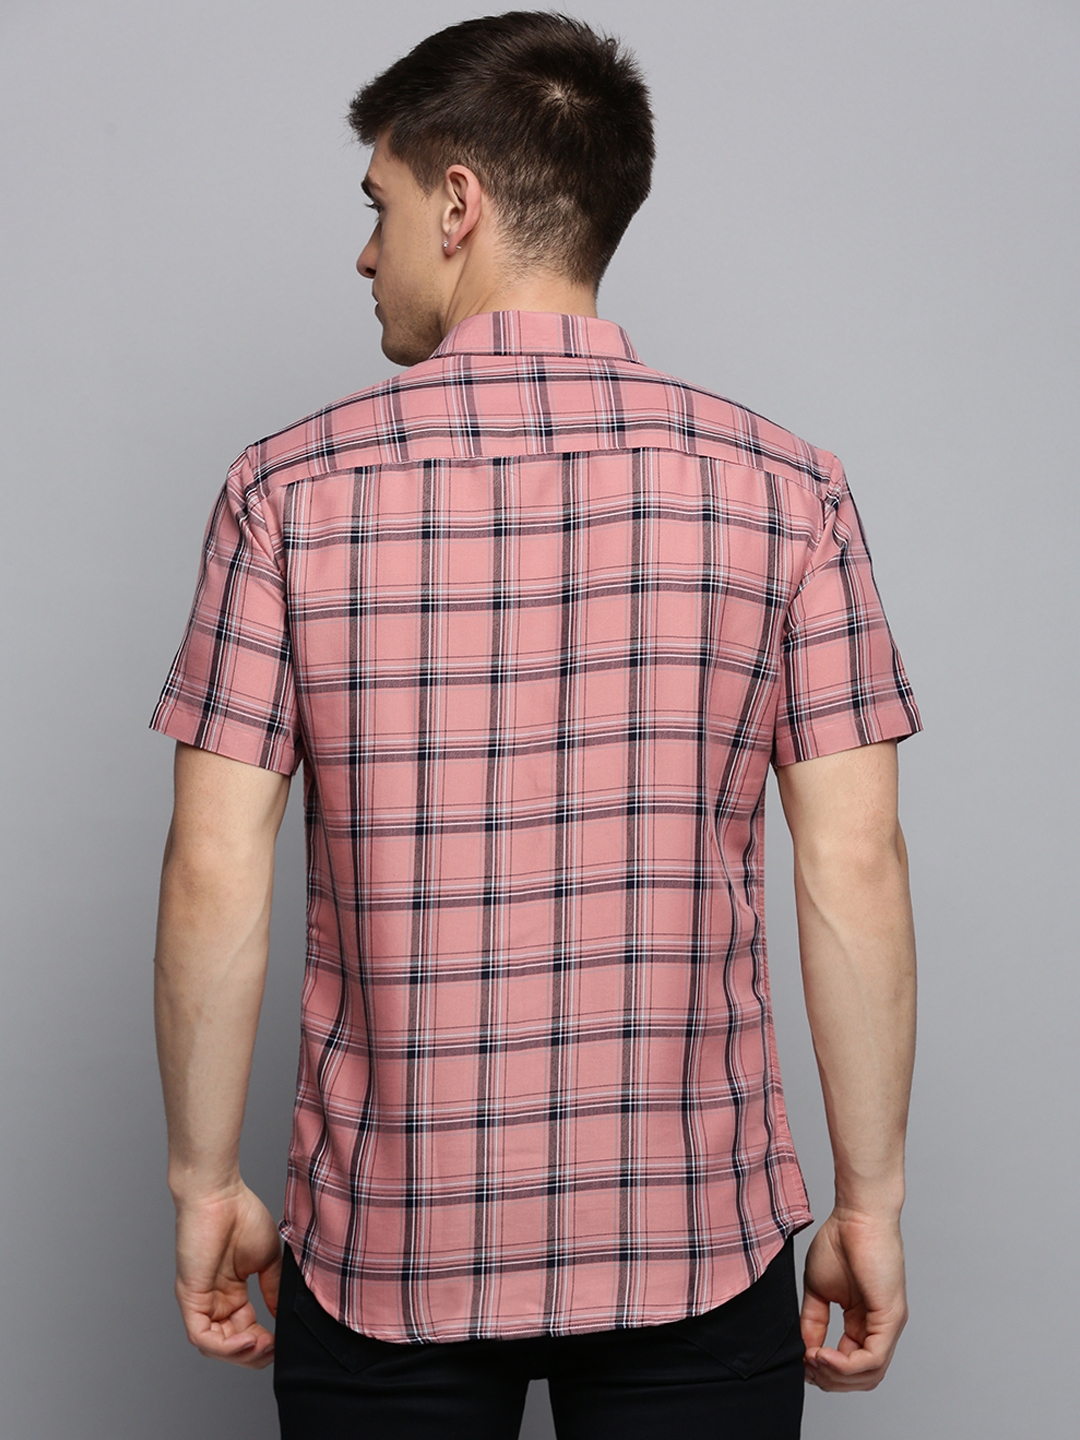 Showoff | SHOWOFF Men's Spread Collar Checked Pink Classic Shirt 3